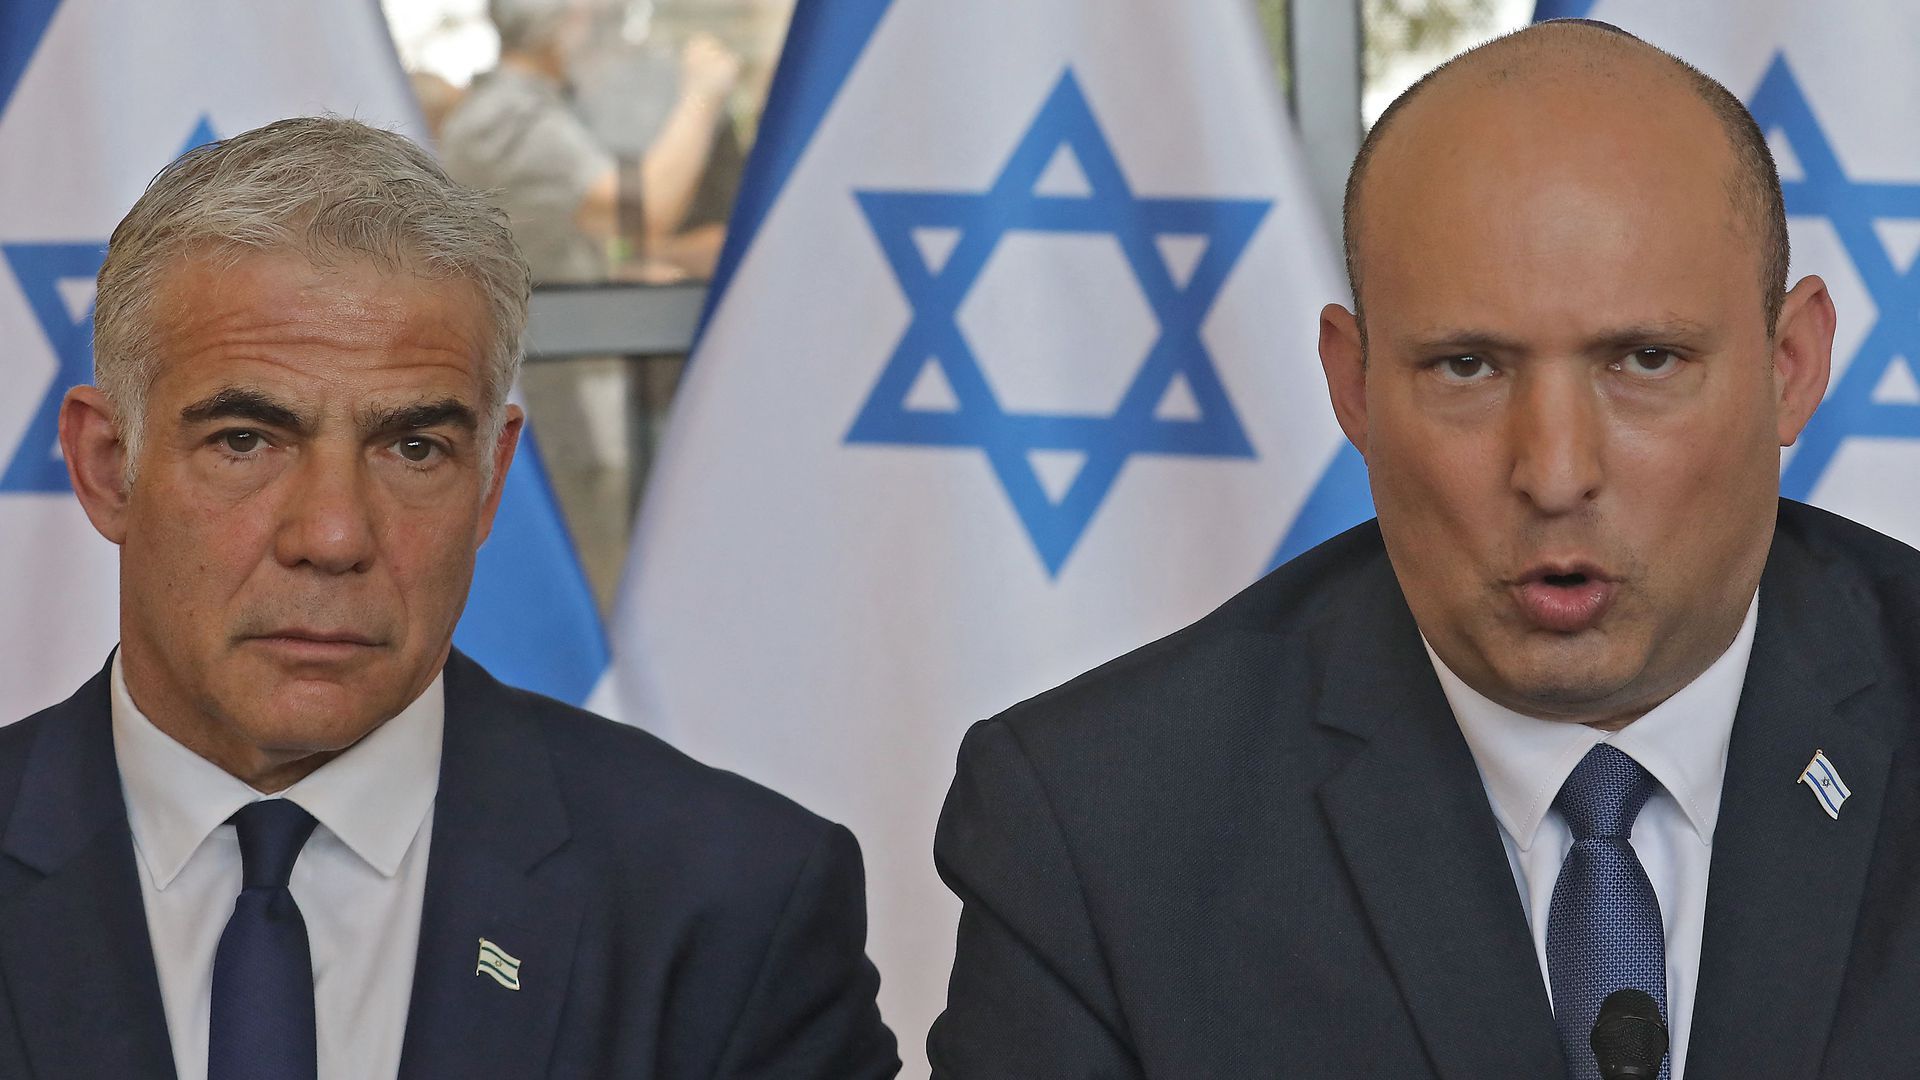 Prime Minister Bennett (R) with Foreign Ministert Lapid at a cabinet meeting on May 29. Photo: Gil Cohen-Magen/AFP via Gettty